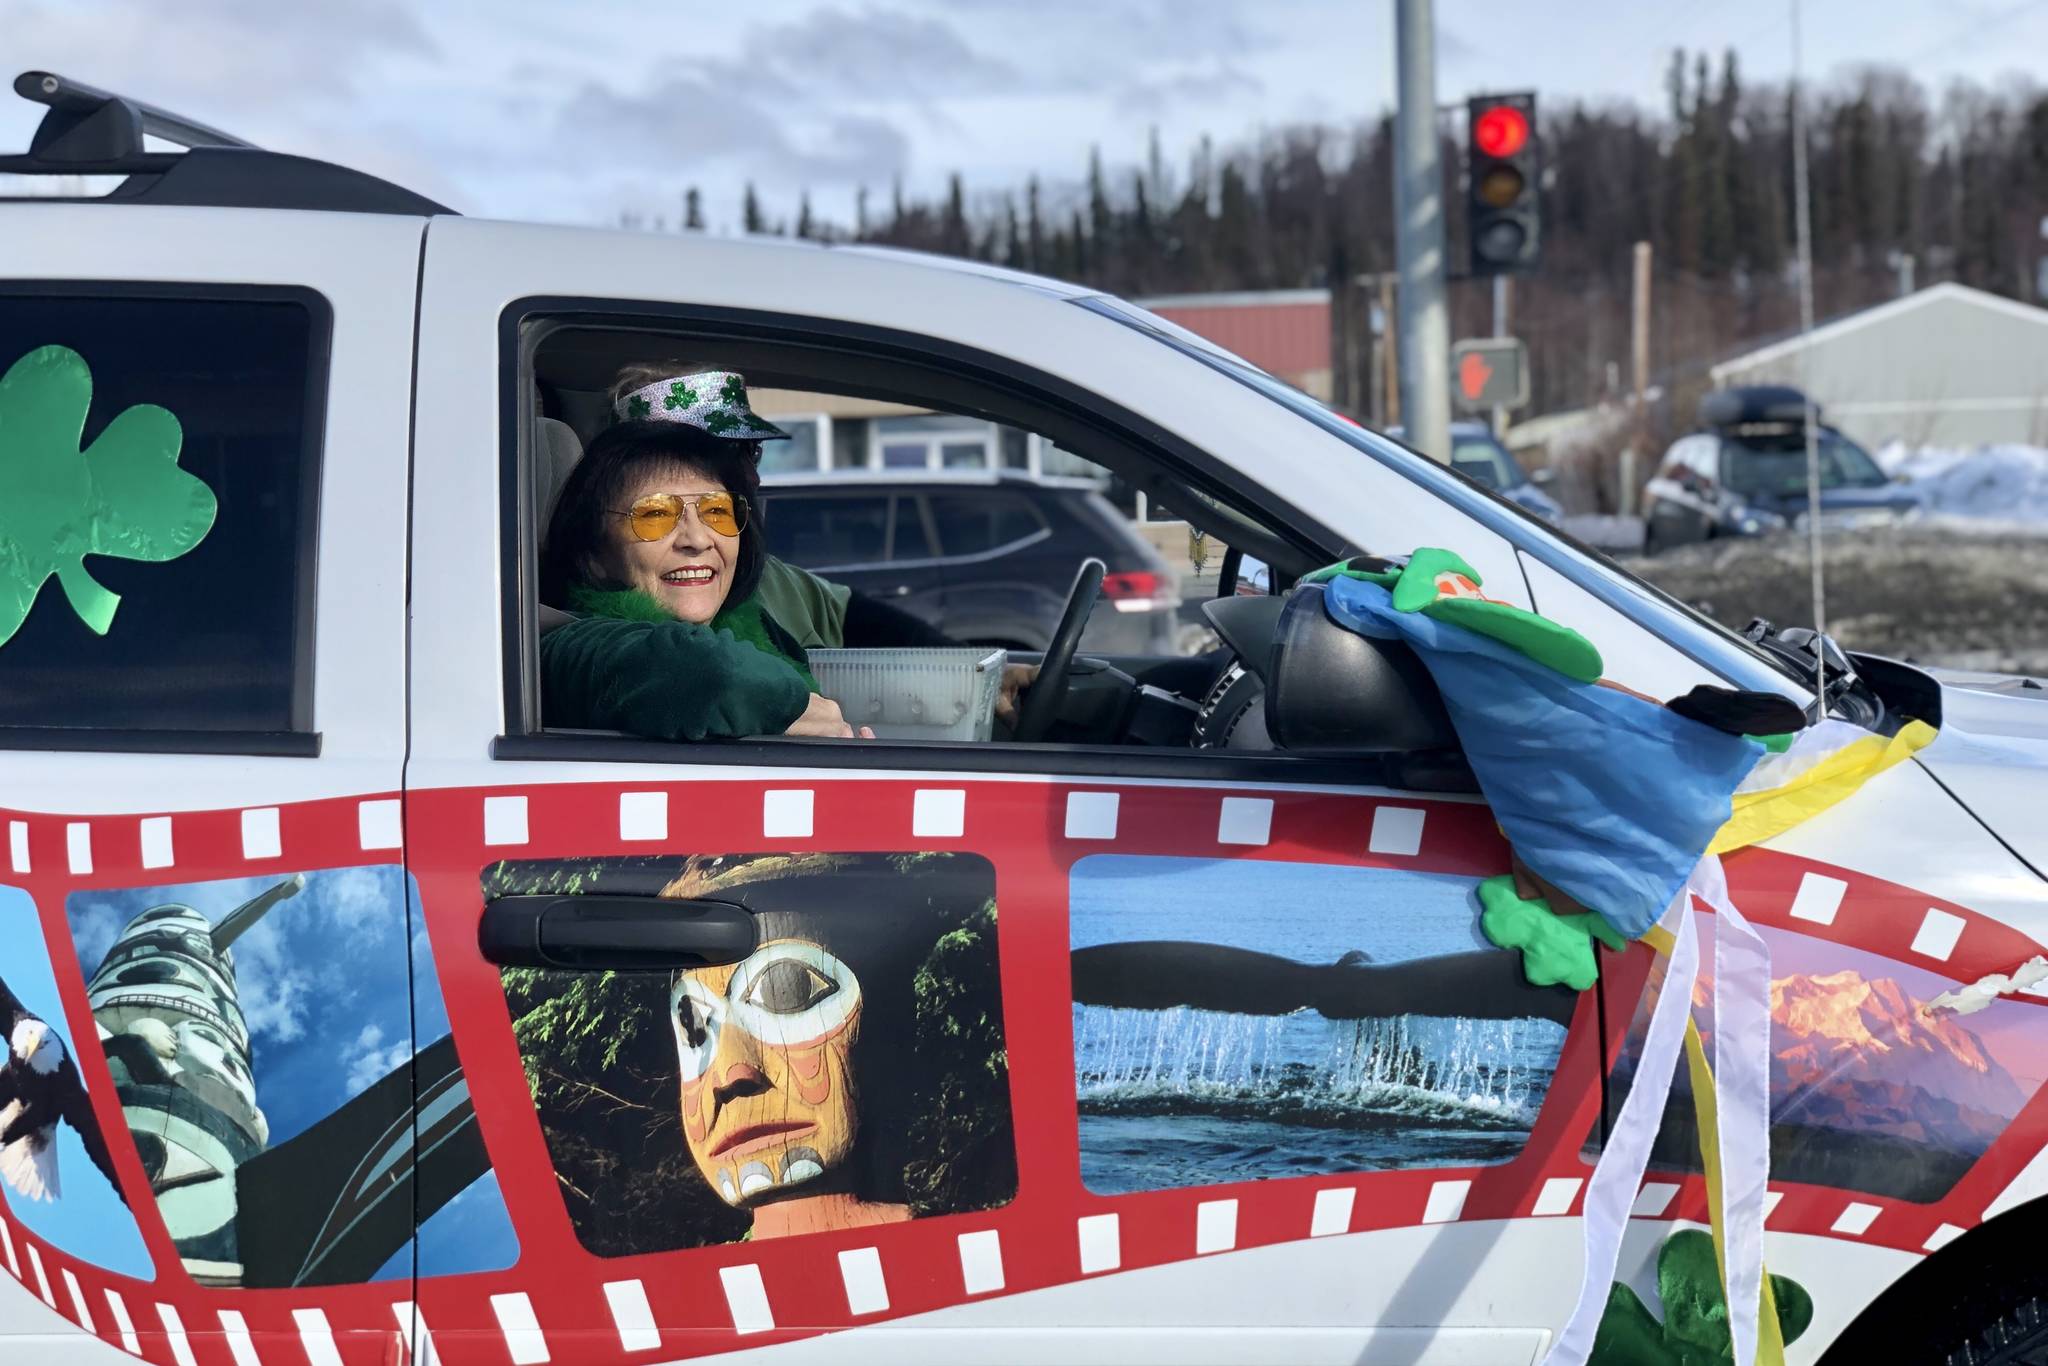 The whole community was invited to participate in Soldotna’s 28th annual St. Patrick’s Day parade, on Sunday, March 17, 2019, in Soldotna, Alaska. (Photo by Victoria Petersen)